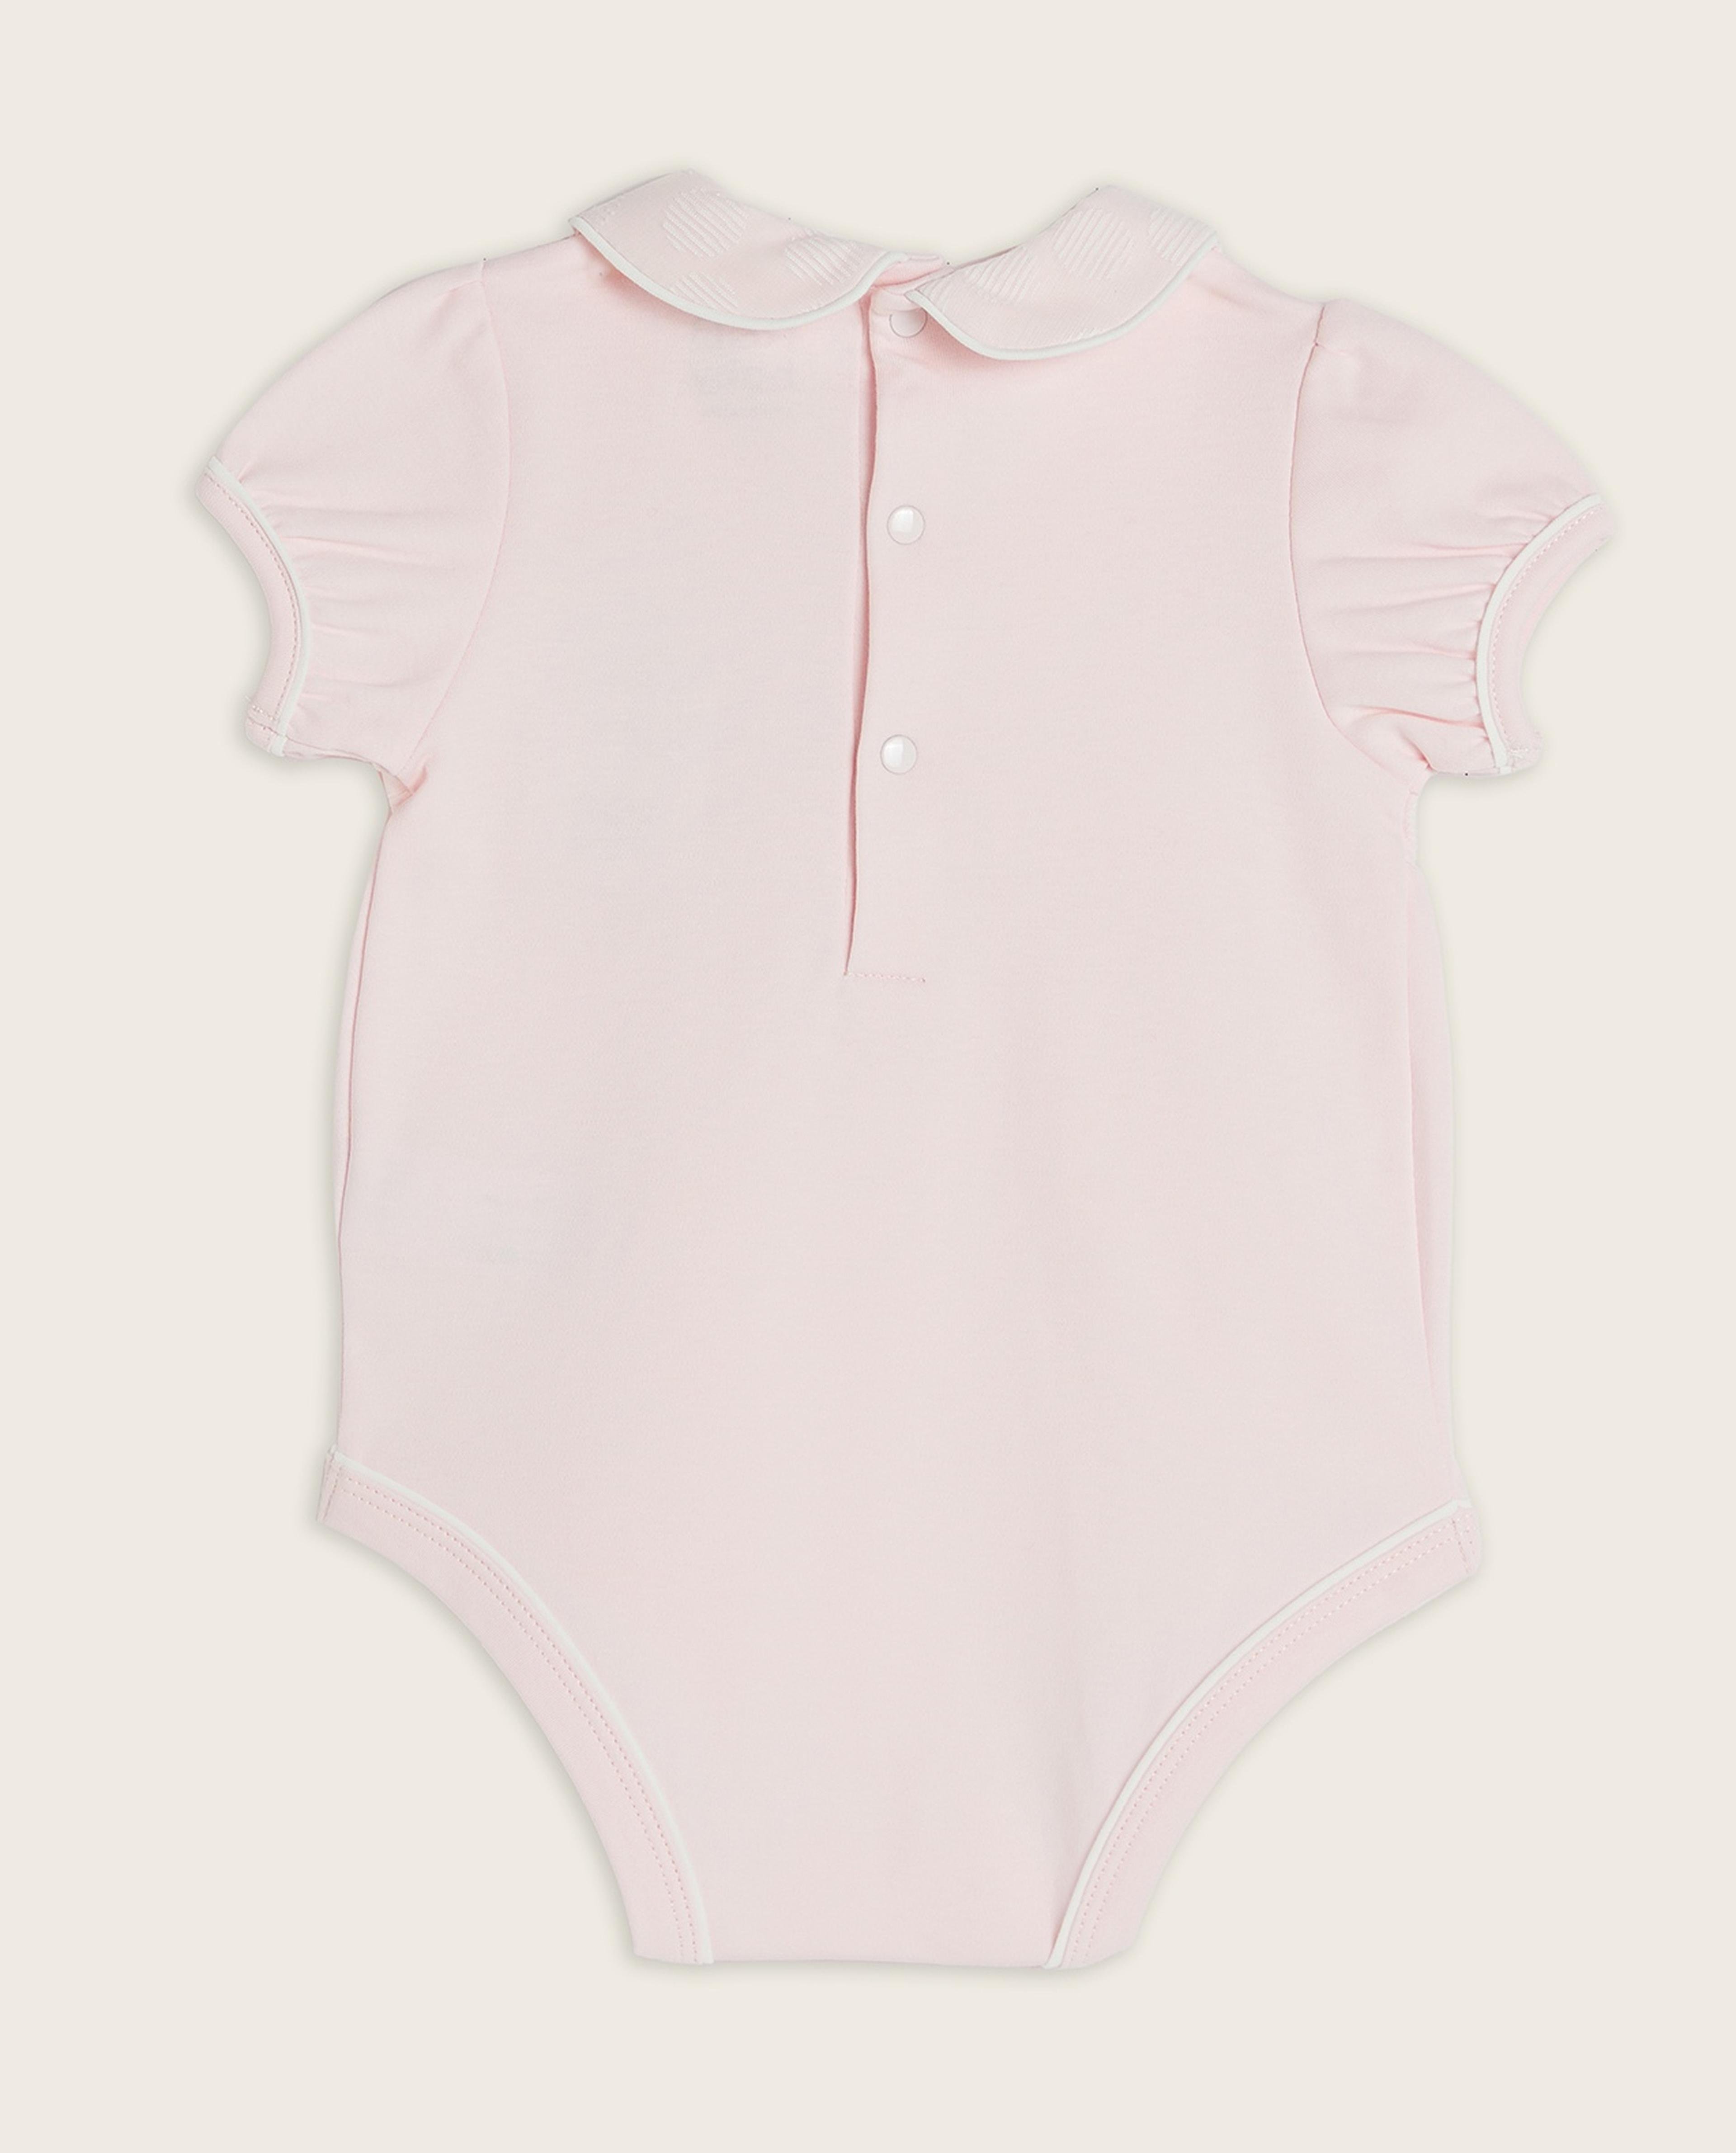 Patterned Bodysuit with Baby Collar and Short Sleeves